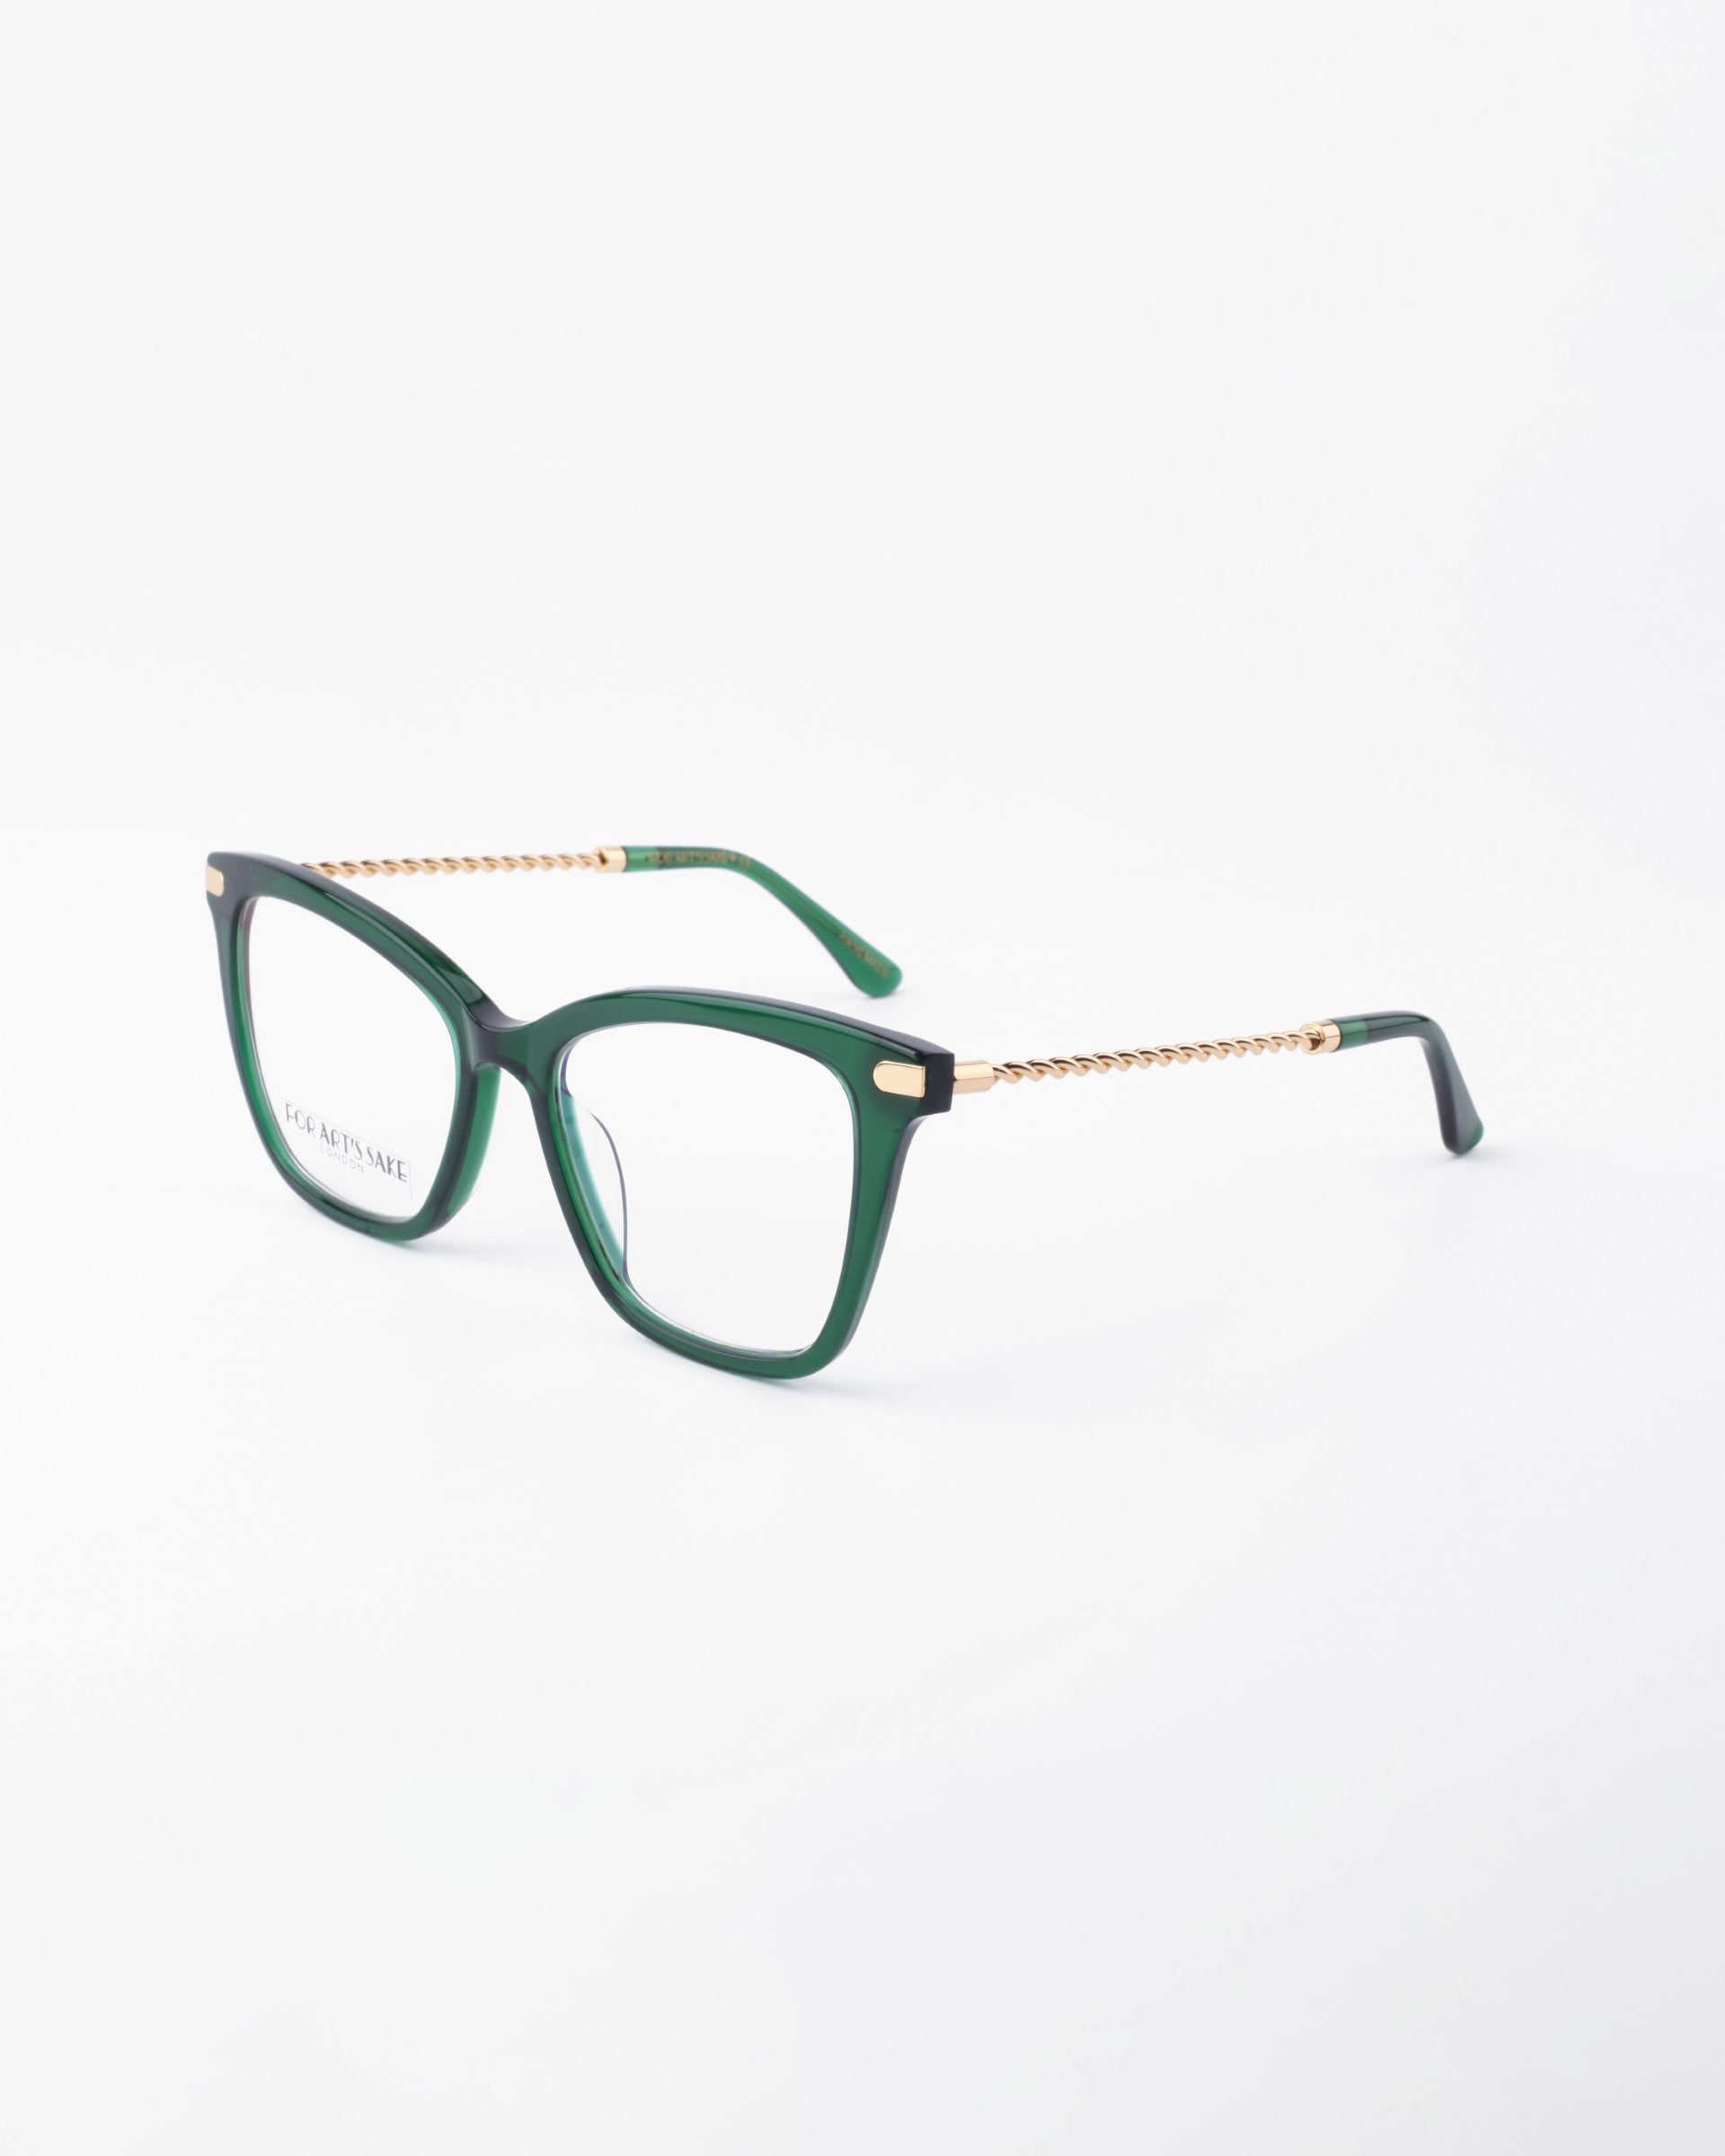 A pair of green Paris Two eyeglasses with square-shaped frames and gold braided metal arms by For Art&#39;s Sake® is displayed against a plain white background. The brand name is visible on the left lens. Designed with both classic and modern elements in mind, these glasses also feature a blue light filter for added protection.